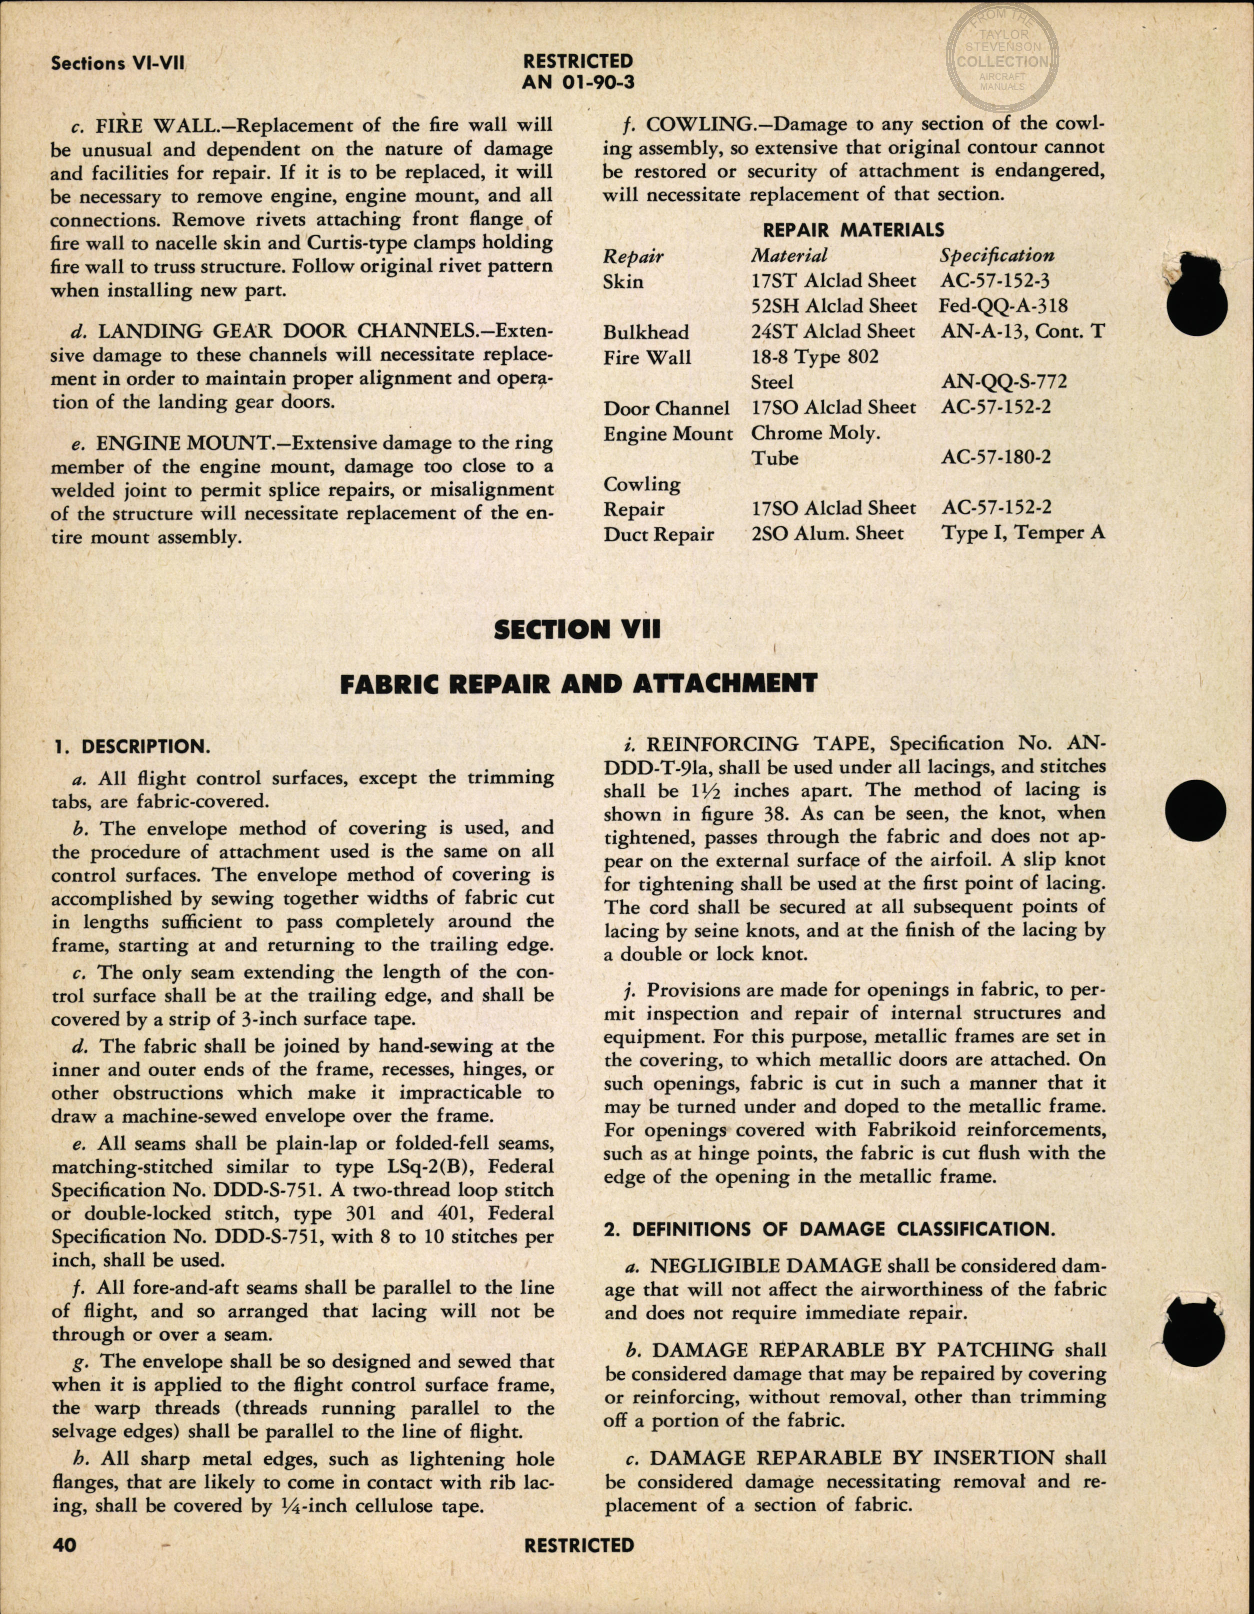 Sample page 42 from AirCorps Library document: Structural Repair Instructions - AT-7 - C-45